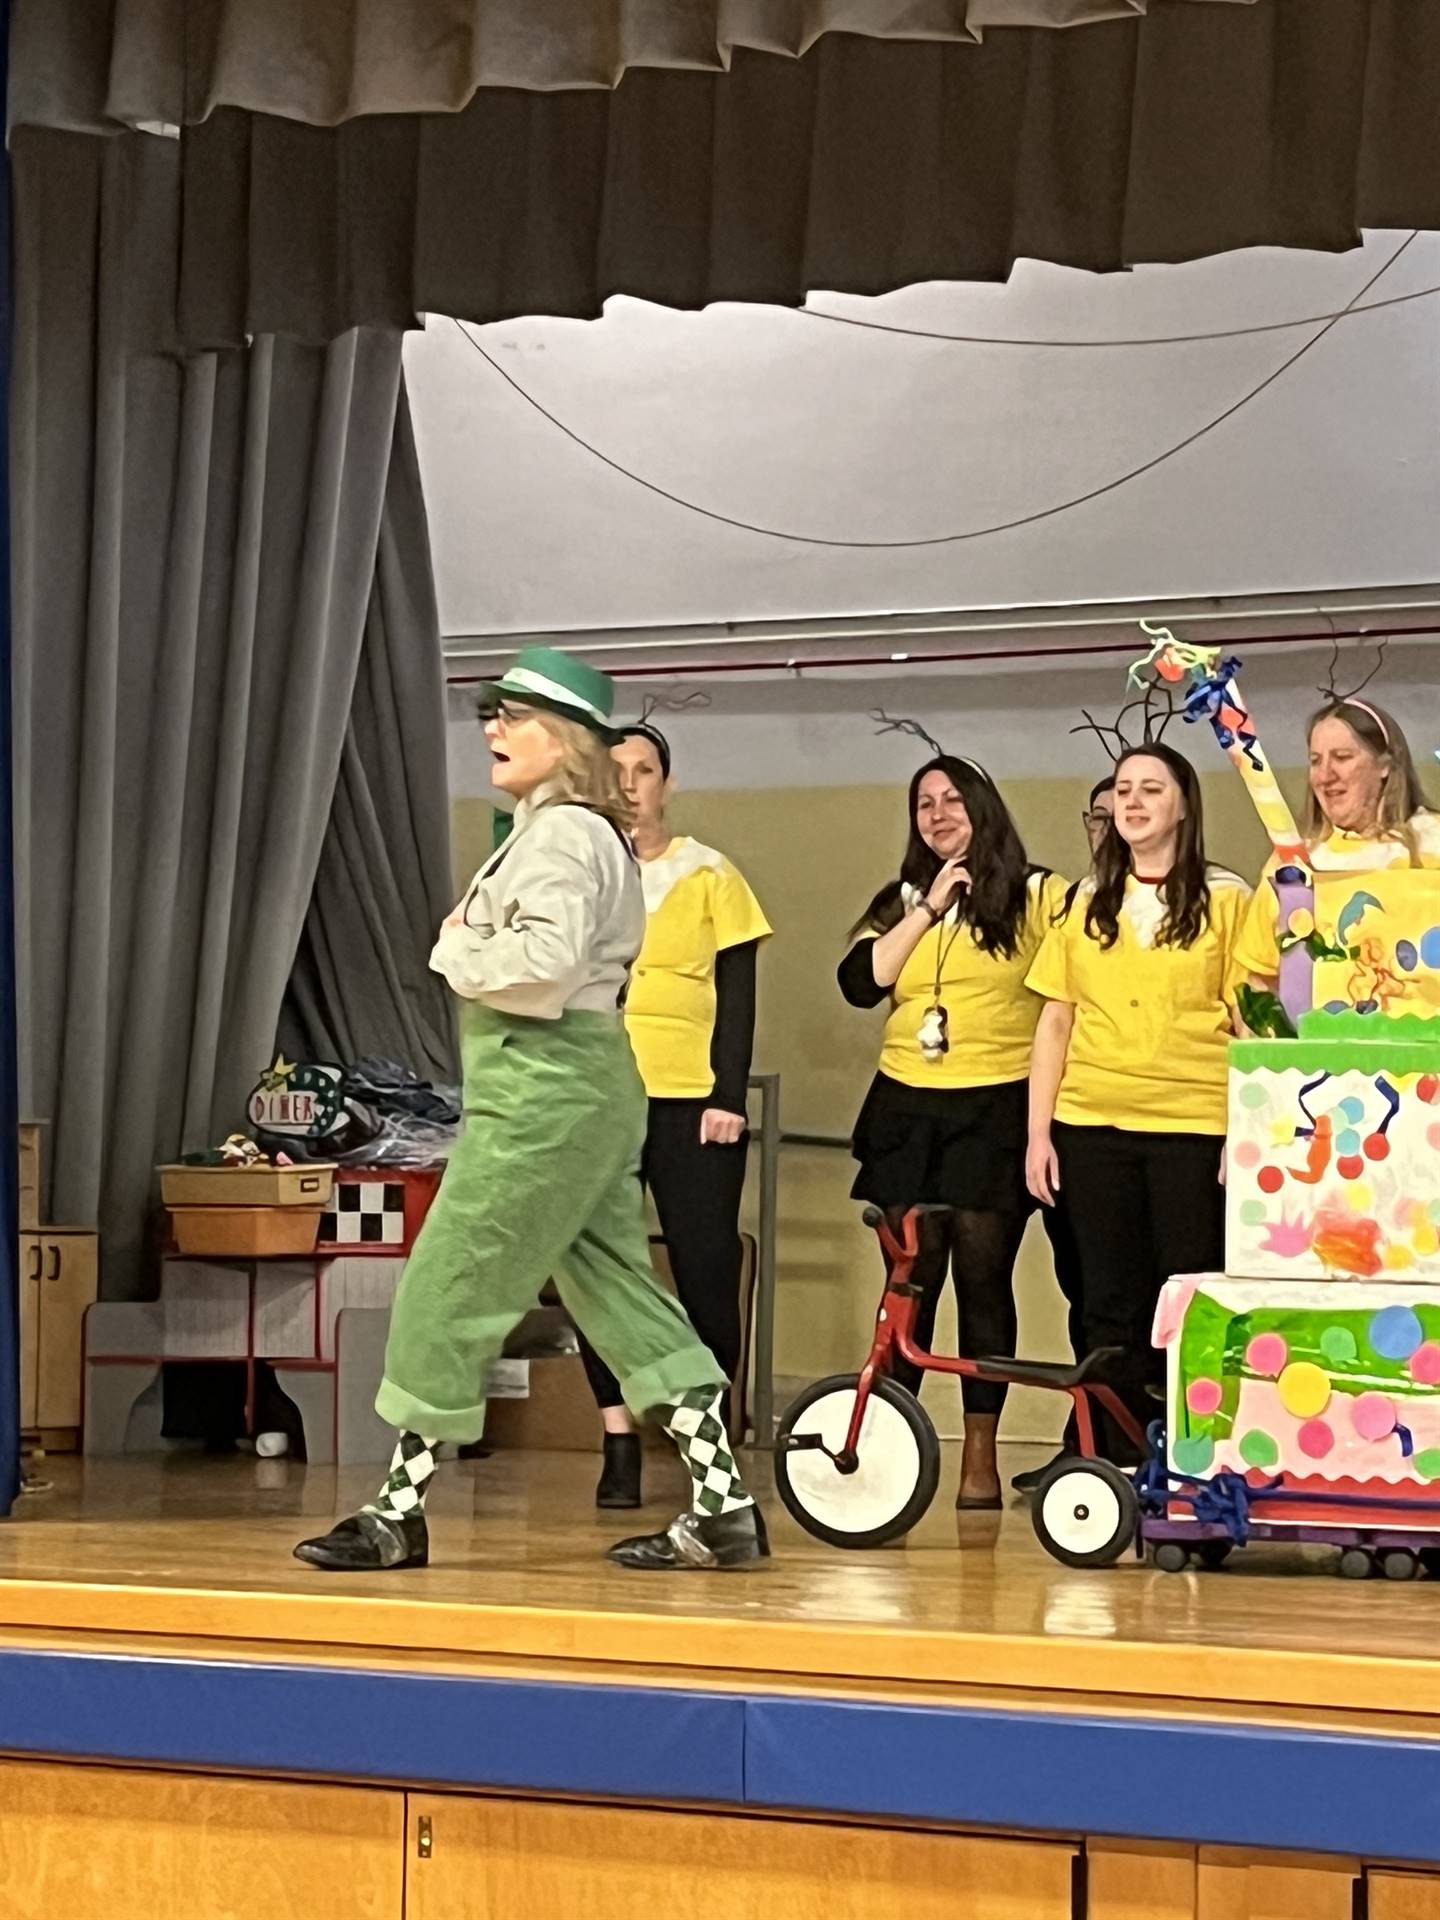 Sylvester McBean pulling his machine while teachers dressed as sneetches watch.